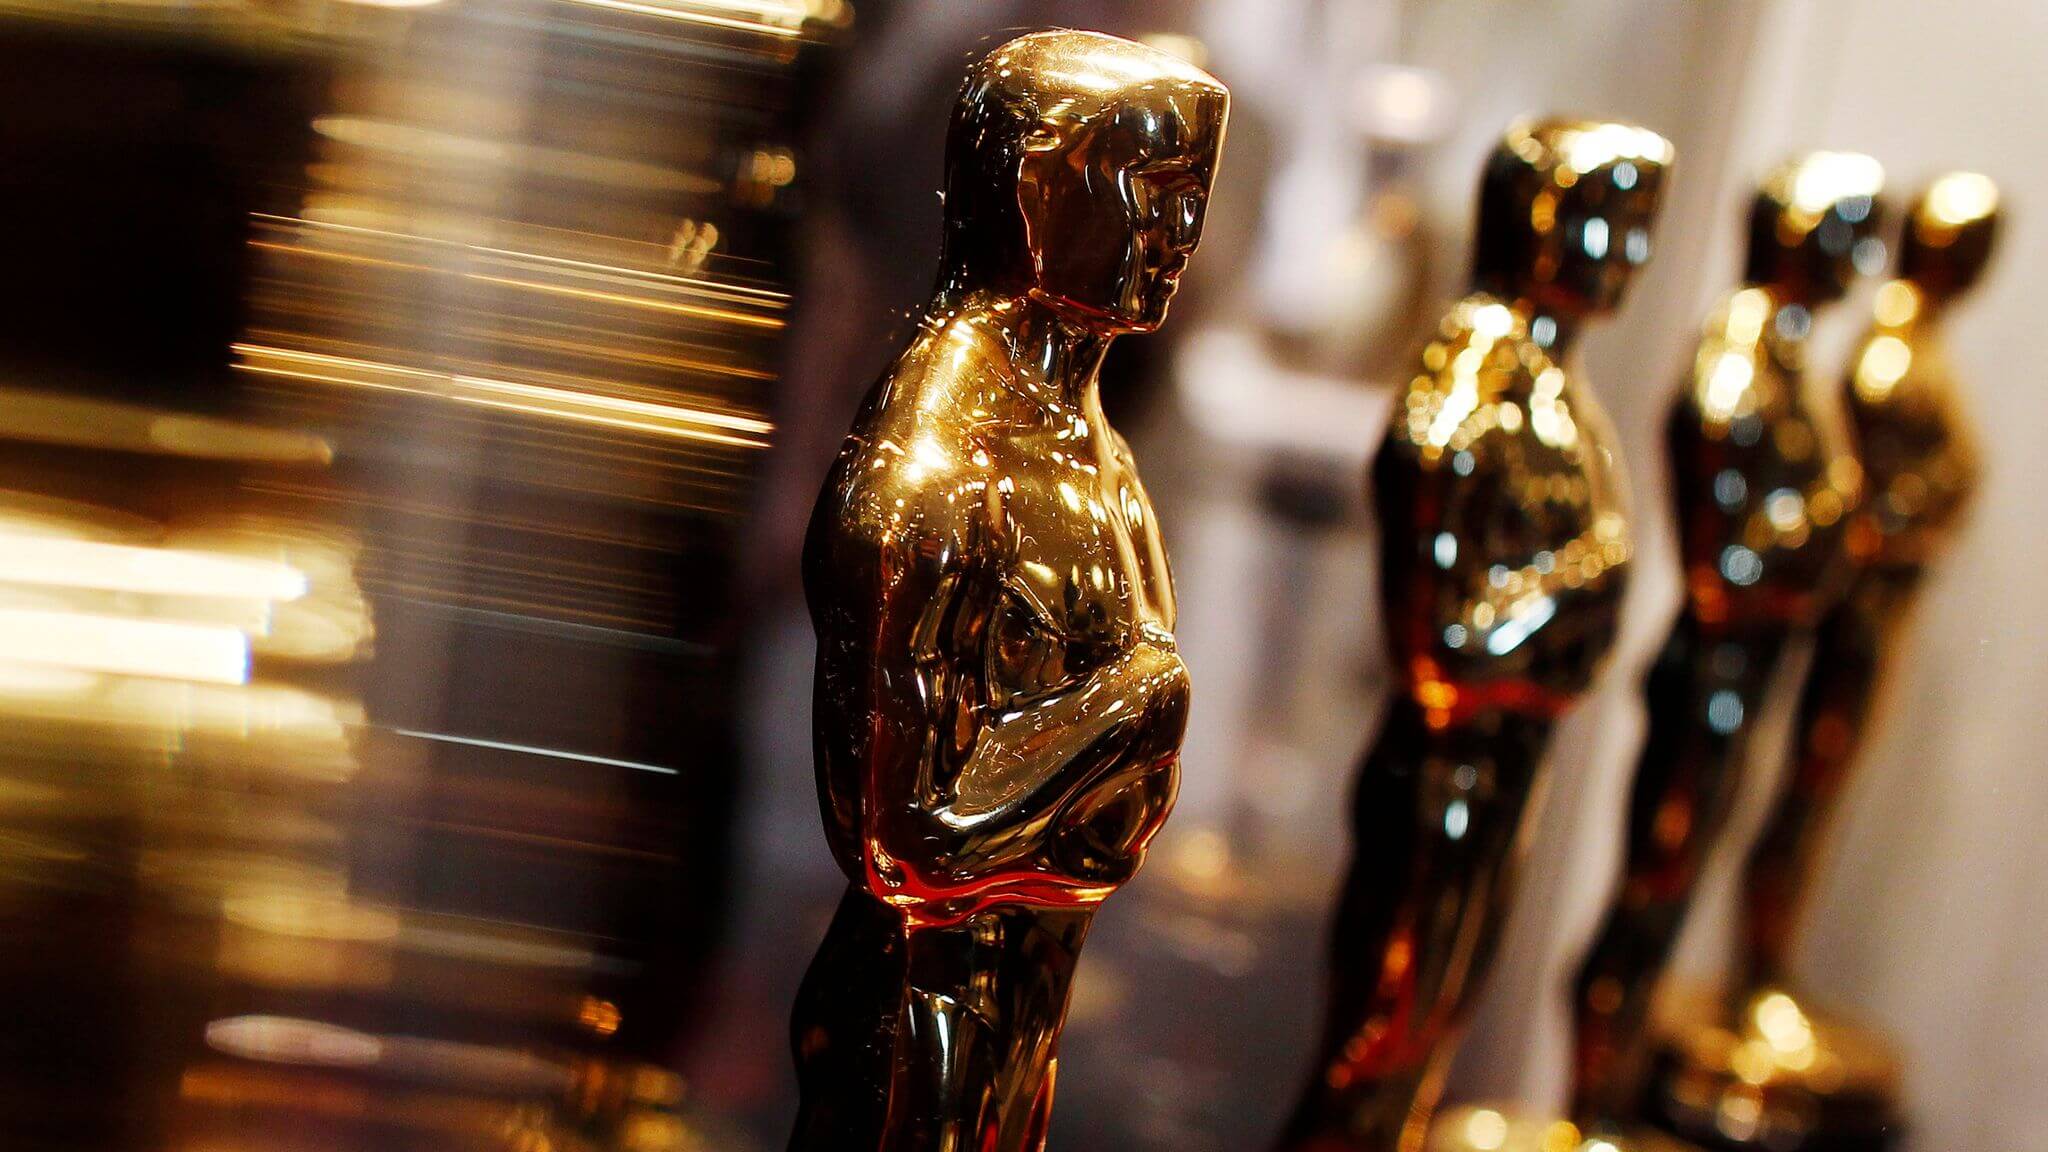 Academy Awards ceremony to be held on March 13, 2023